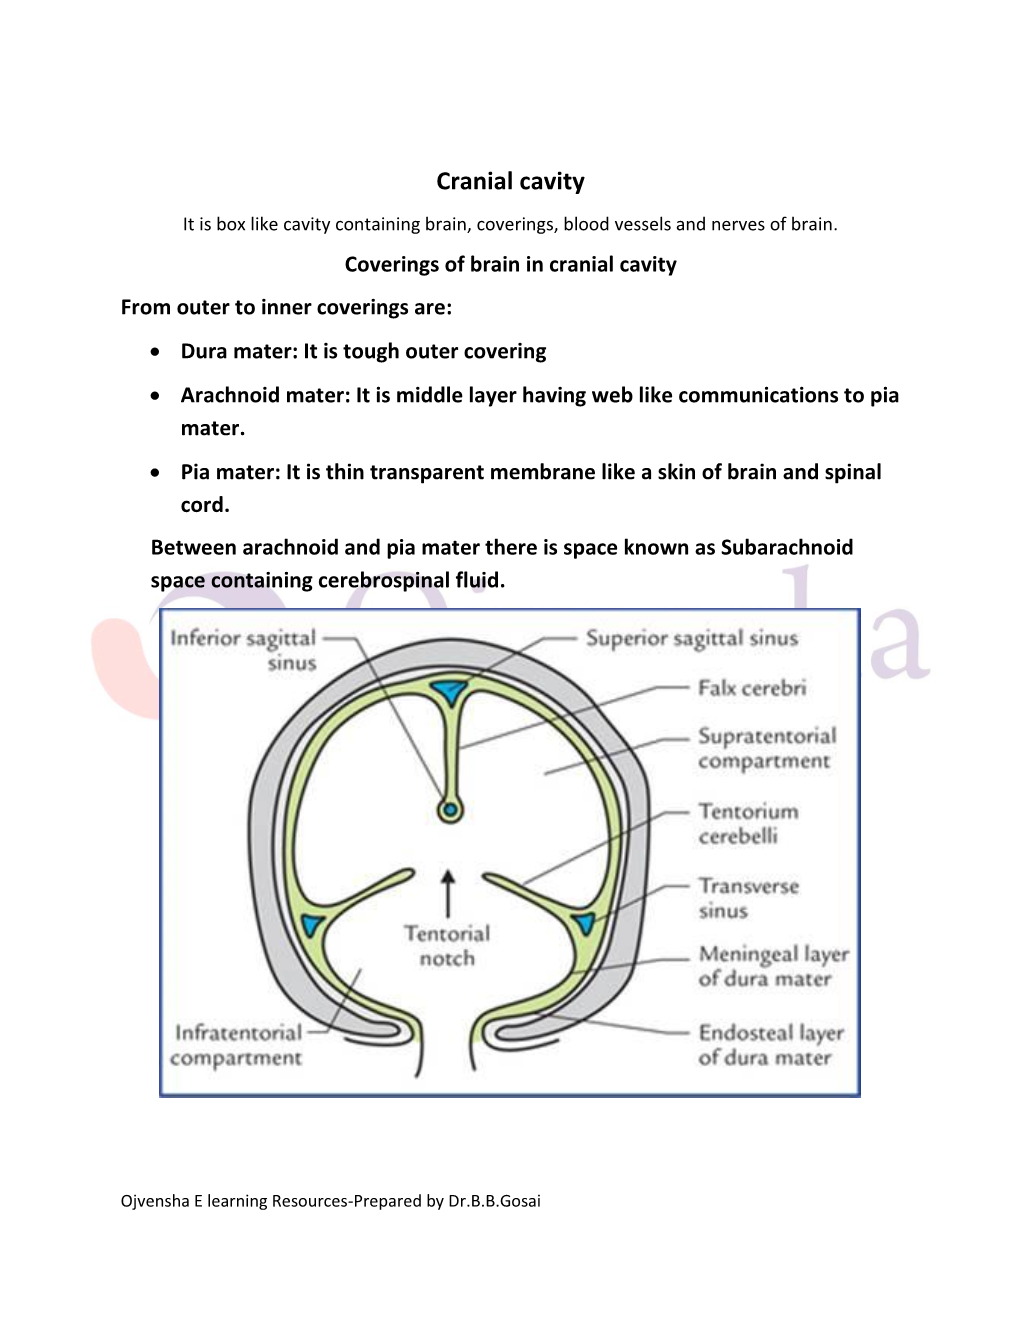 Cranial Cavity It Is Box Like Cavity Containing Brain, Coverings, Blood Vessels and Nerves of Brain